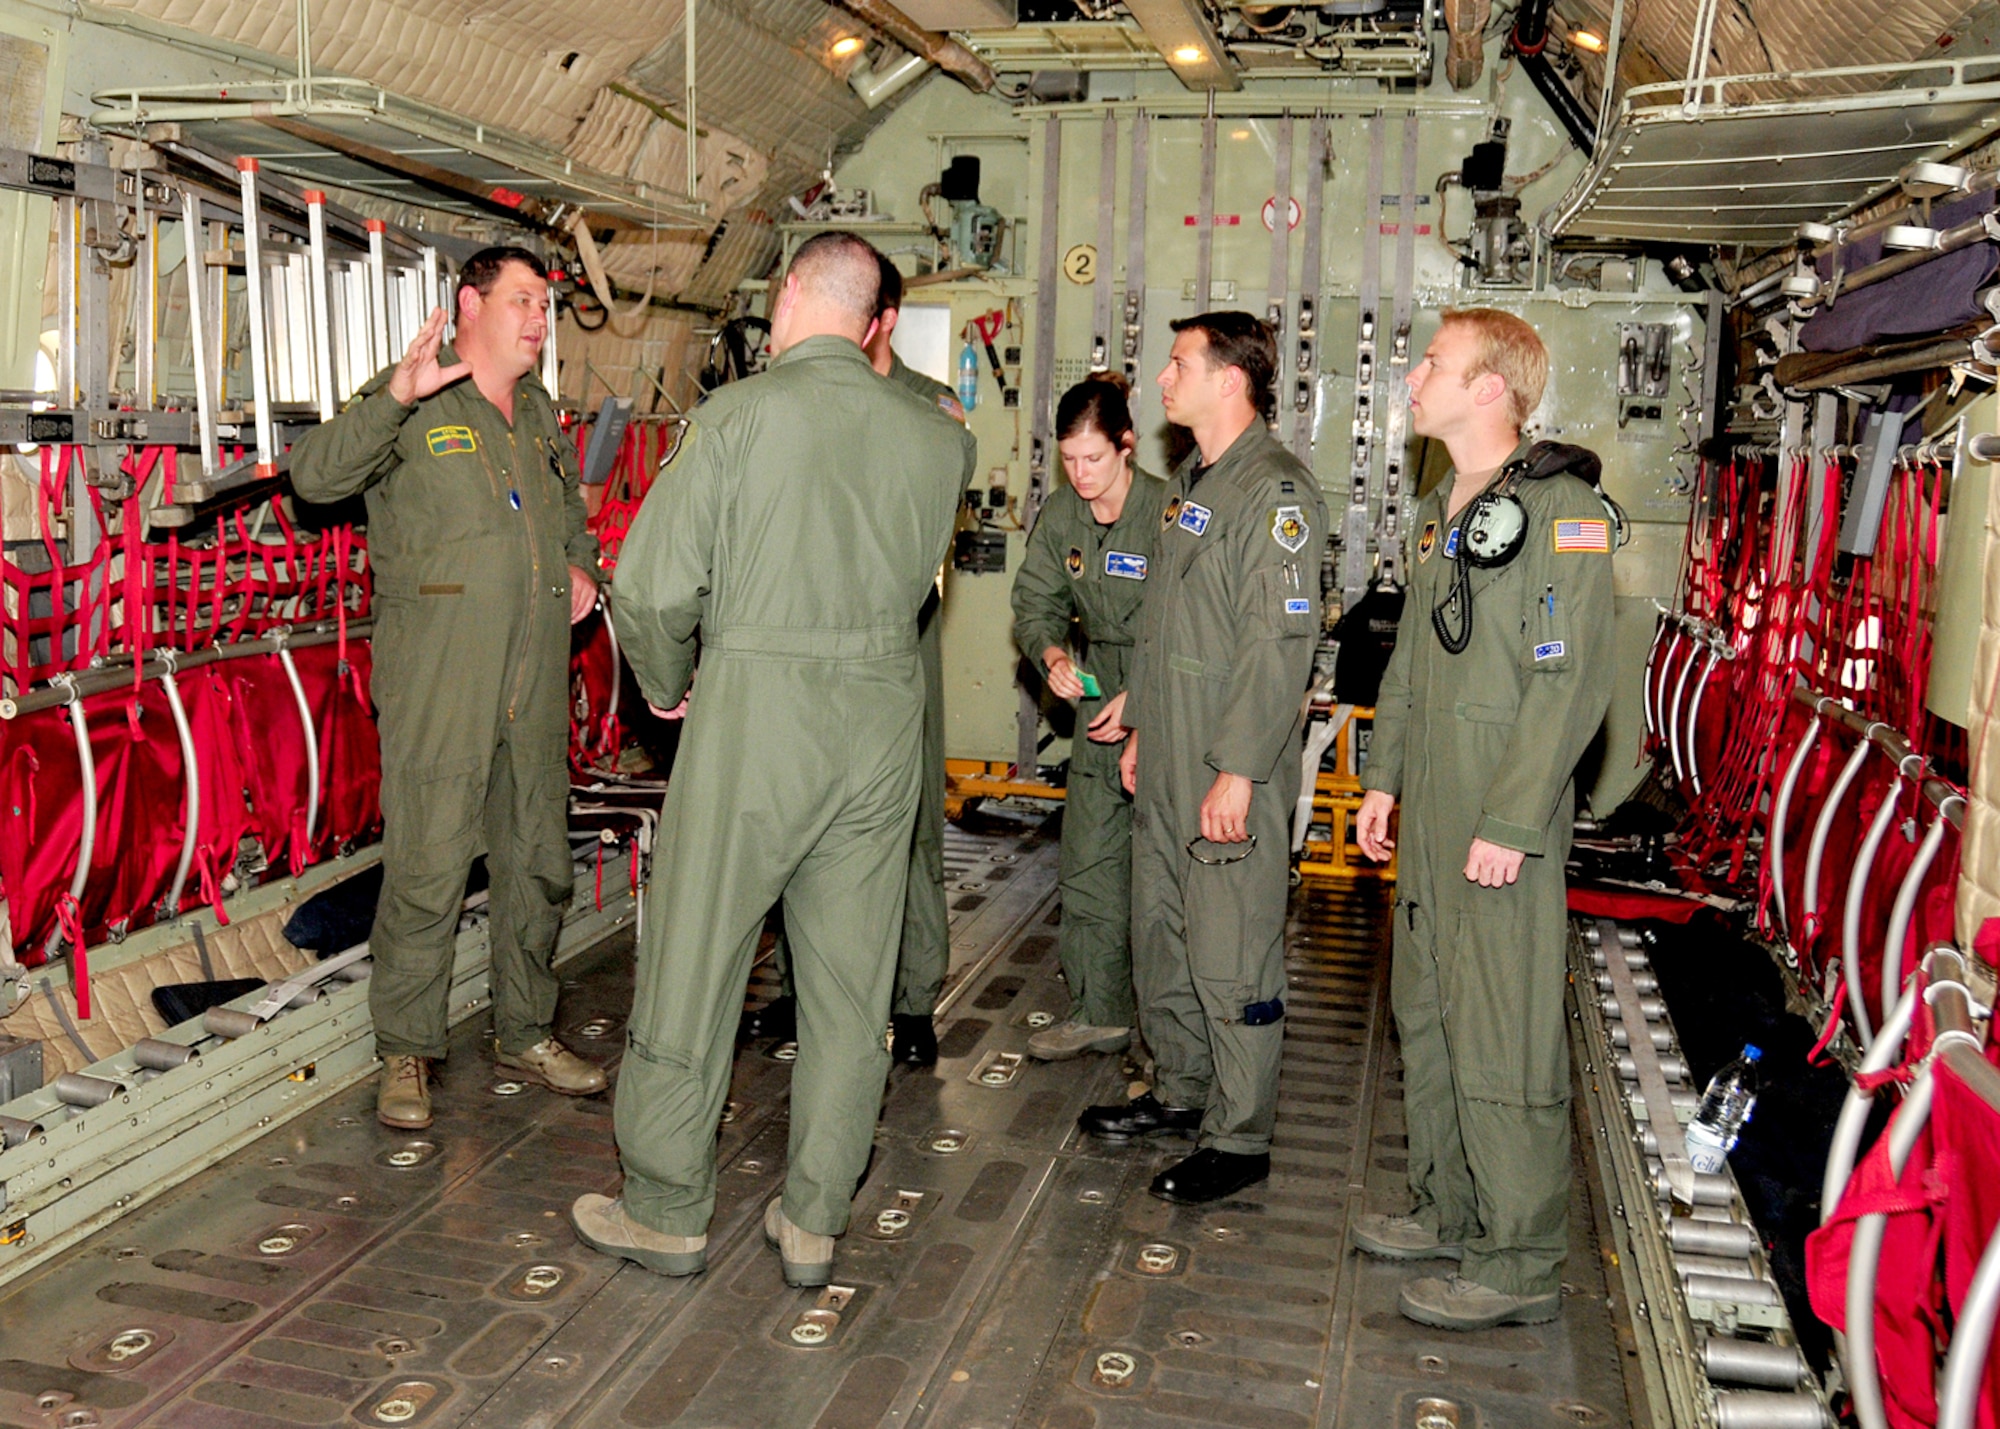 Lieutenant Col. Jurgens Prinsloo, 28th Squadron C-130 pilot, South Africa National Defense Force, gives U.S. Air Force air crew members from the 37th Airlift Squadron, Ramstein Air Base, Germany, a tour of a South African Air Force C-130, Ysterplaat Air Force Base, South Africa, Sept. 22, 2008. (U.S. Air Force photo by Staff Sgt. Markus Maier)(Release)